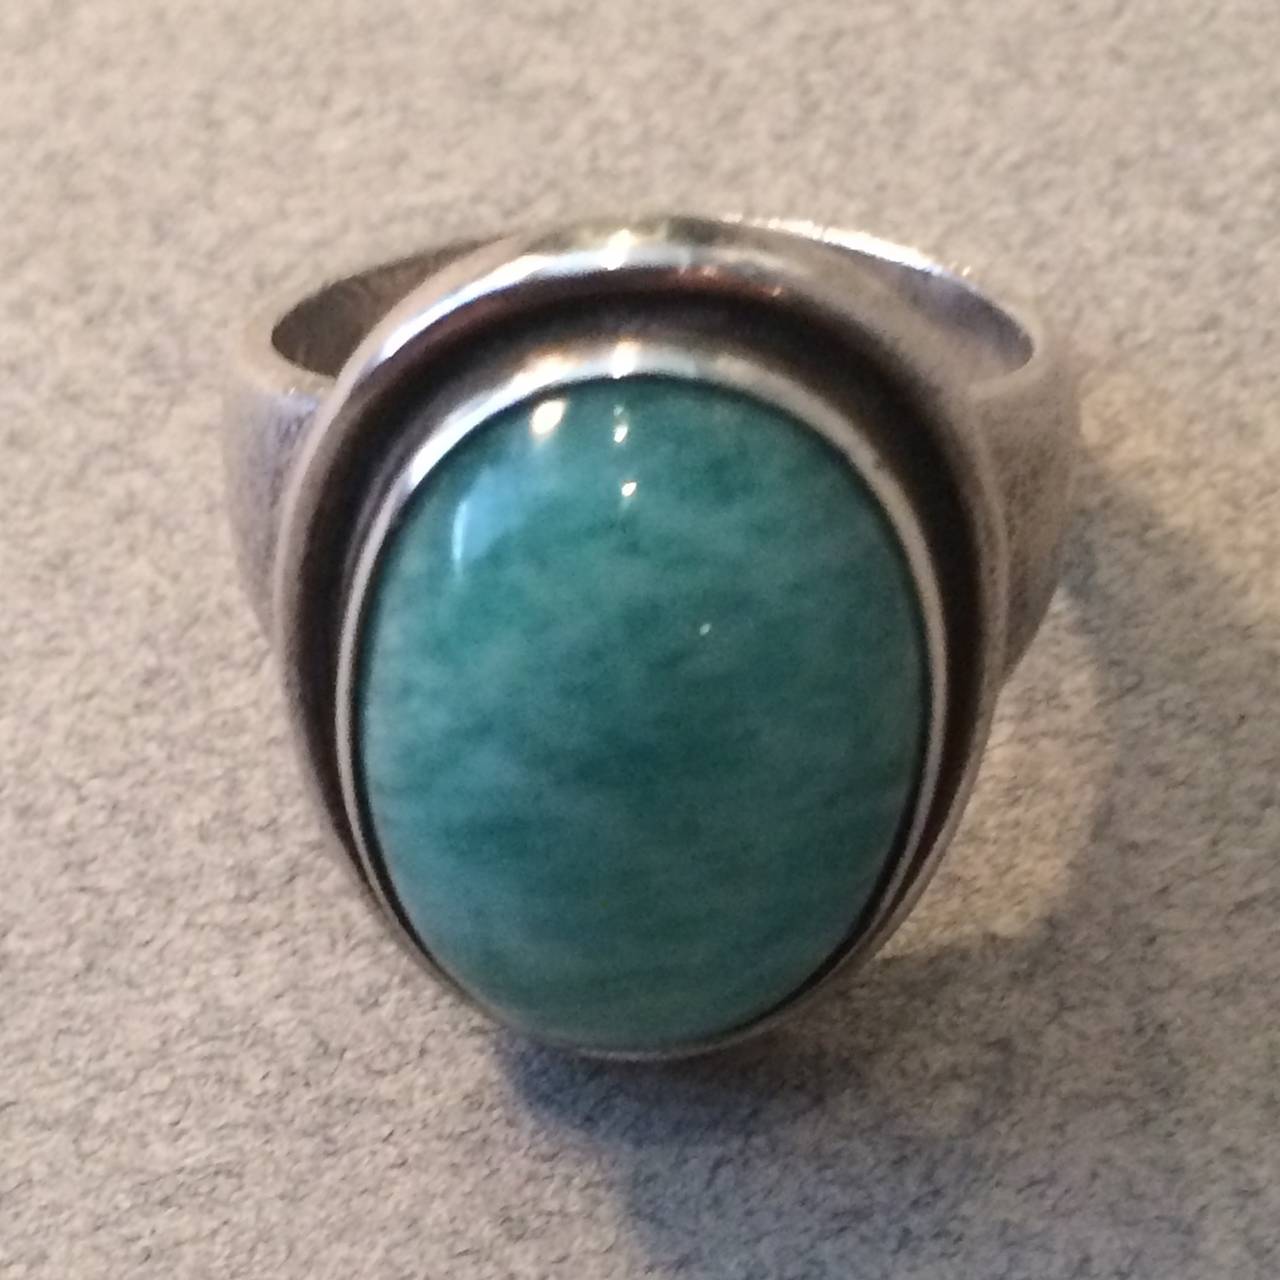 Georg Jensen Ring No 46A with Amazonite cabochon.

Seldom seen with this stone. Excellent condition. Circa 1945.

Size 7.5